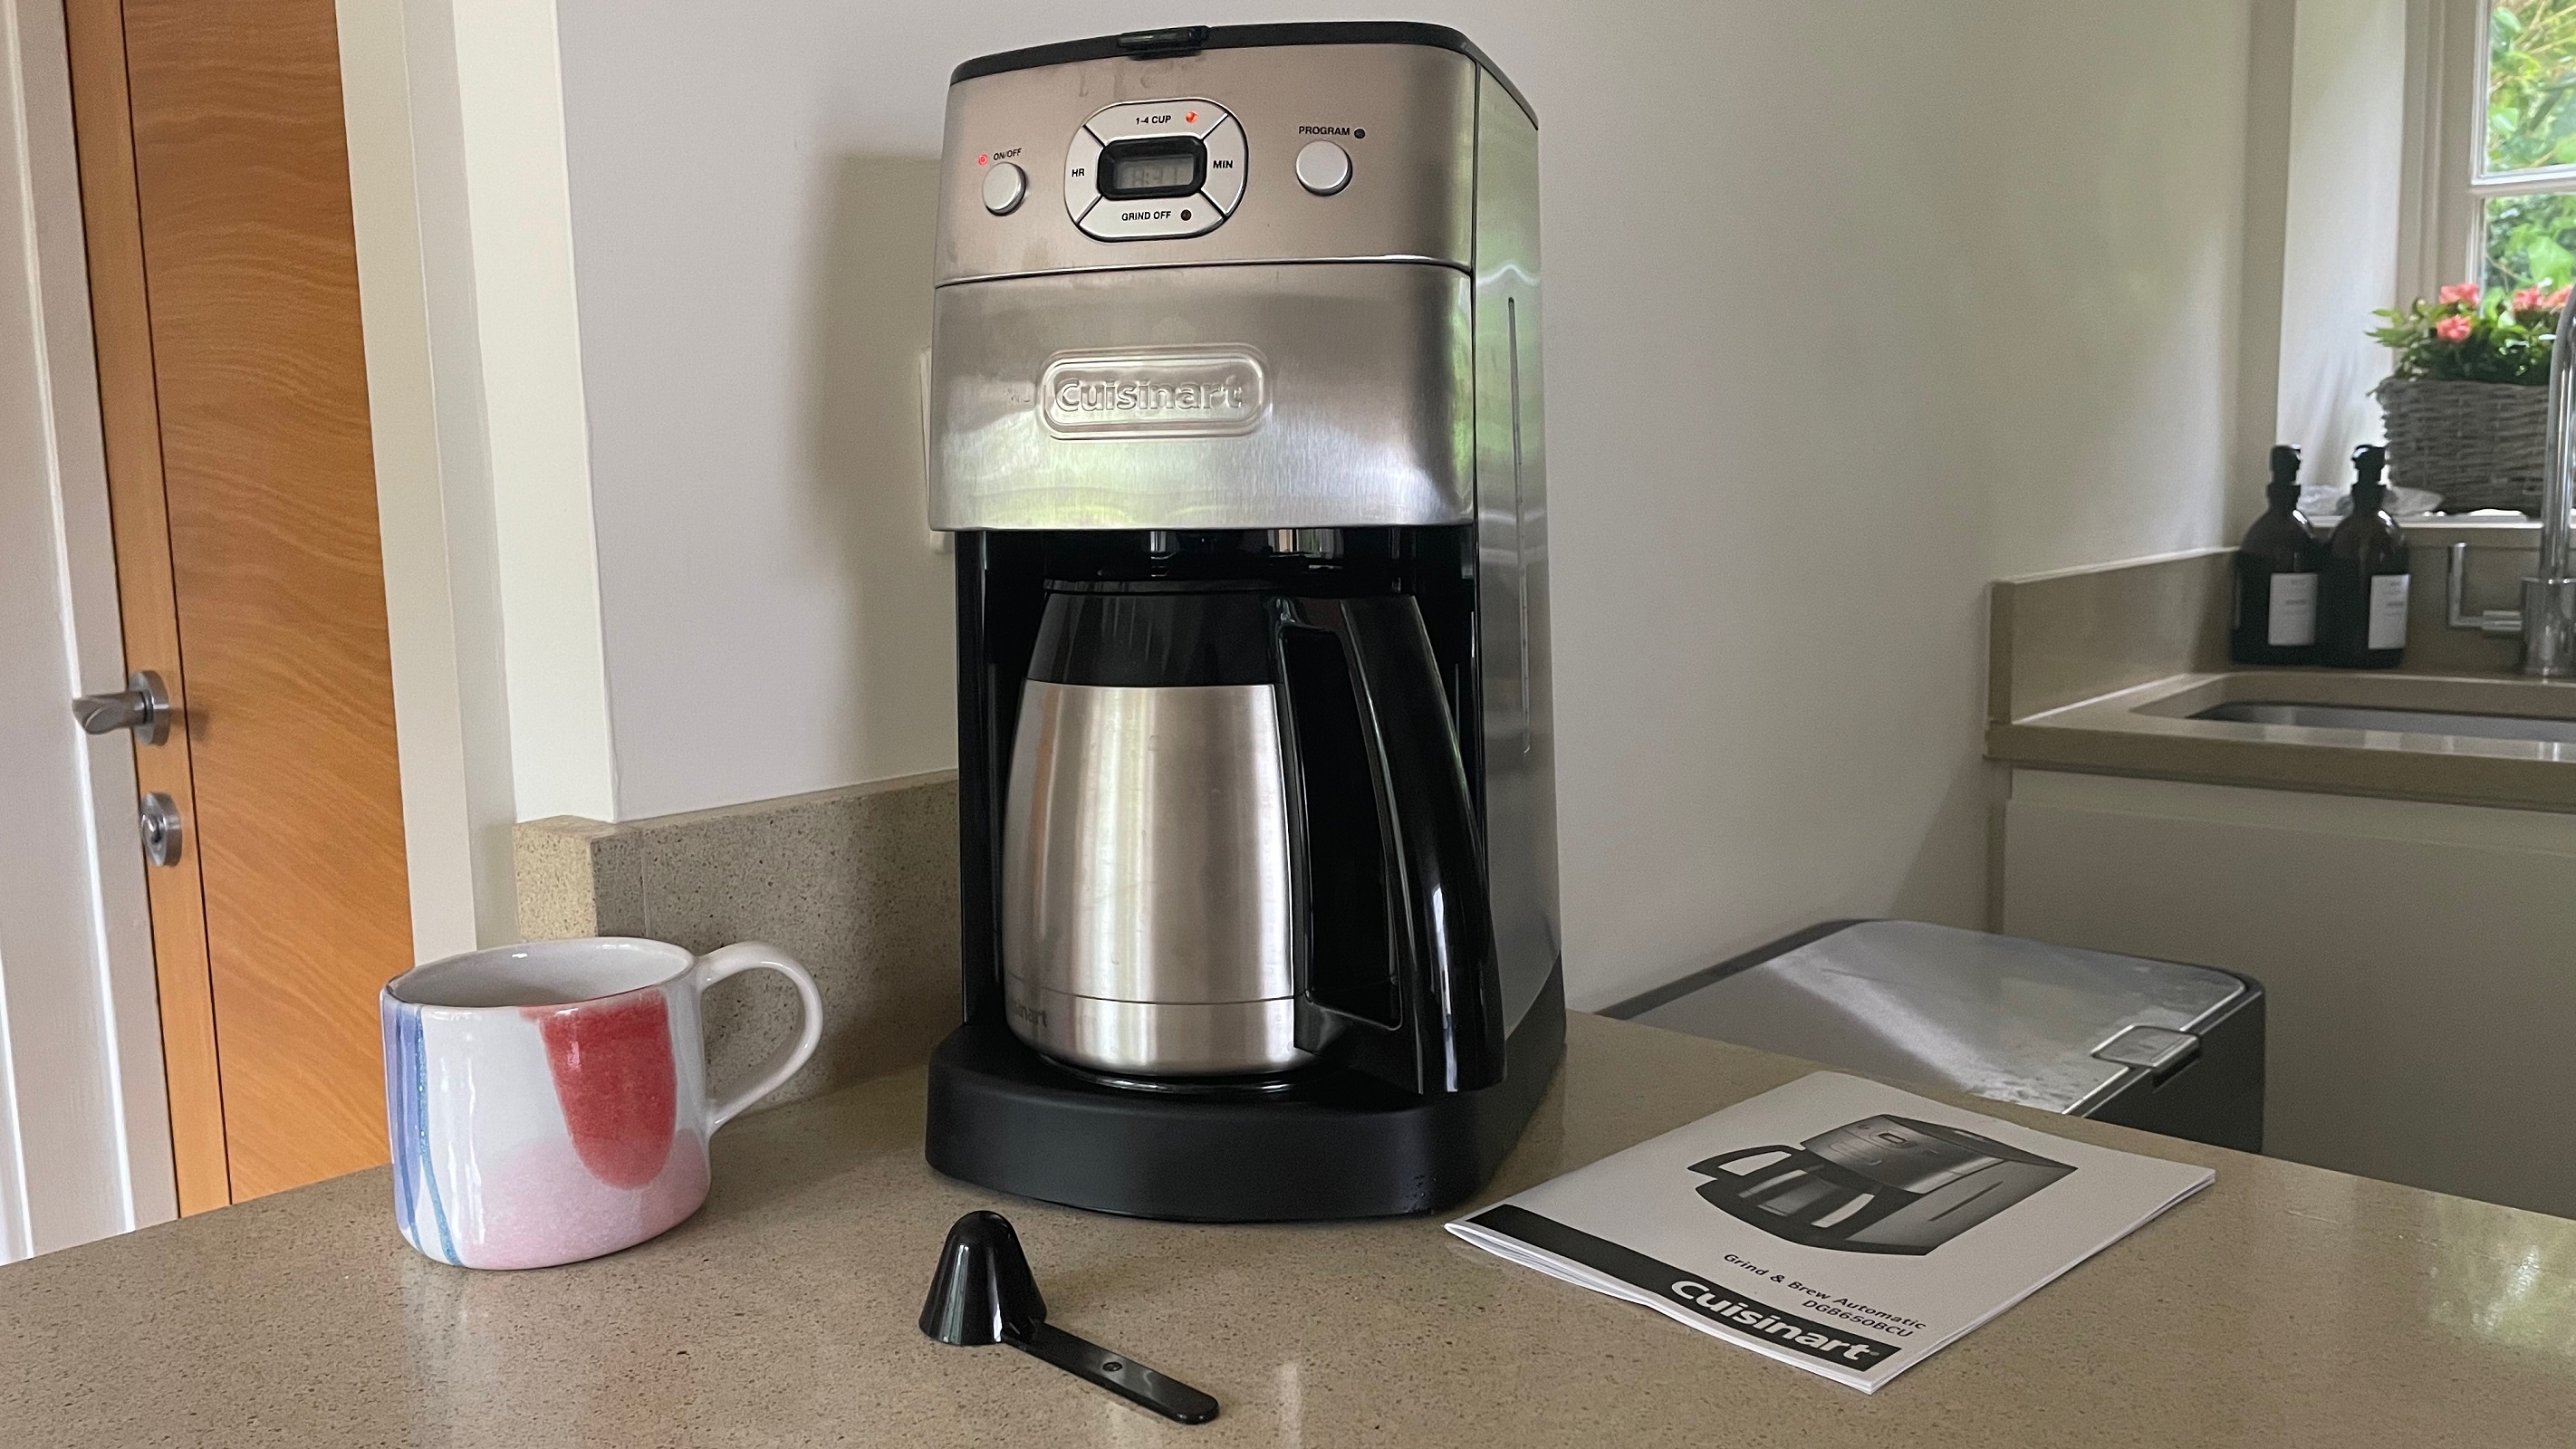 Prepared and assembled by Cuisinart Grind & Brew